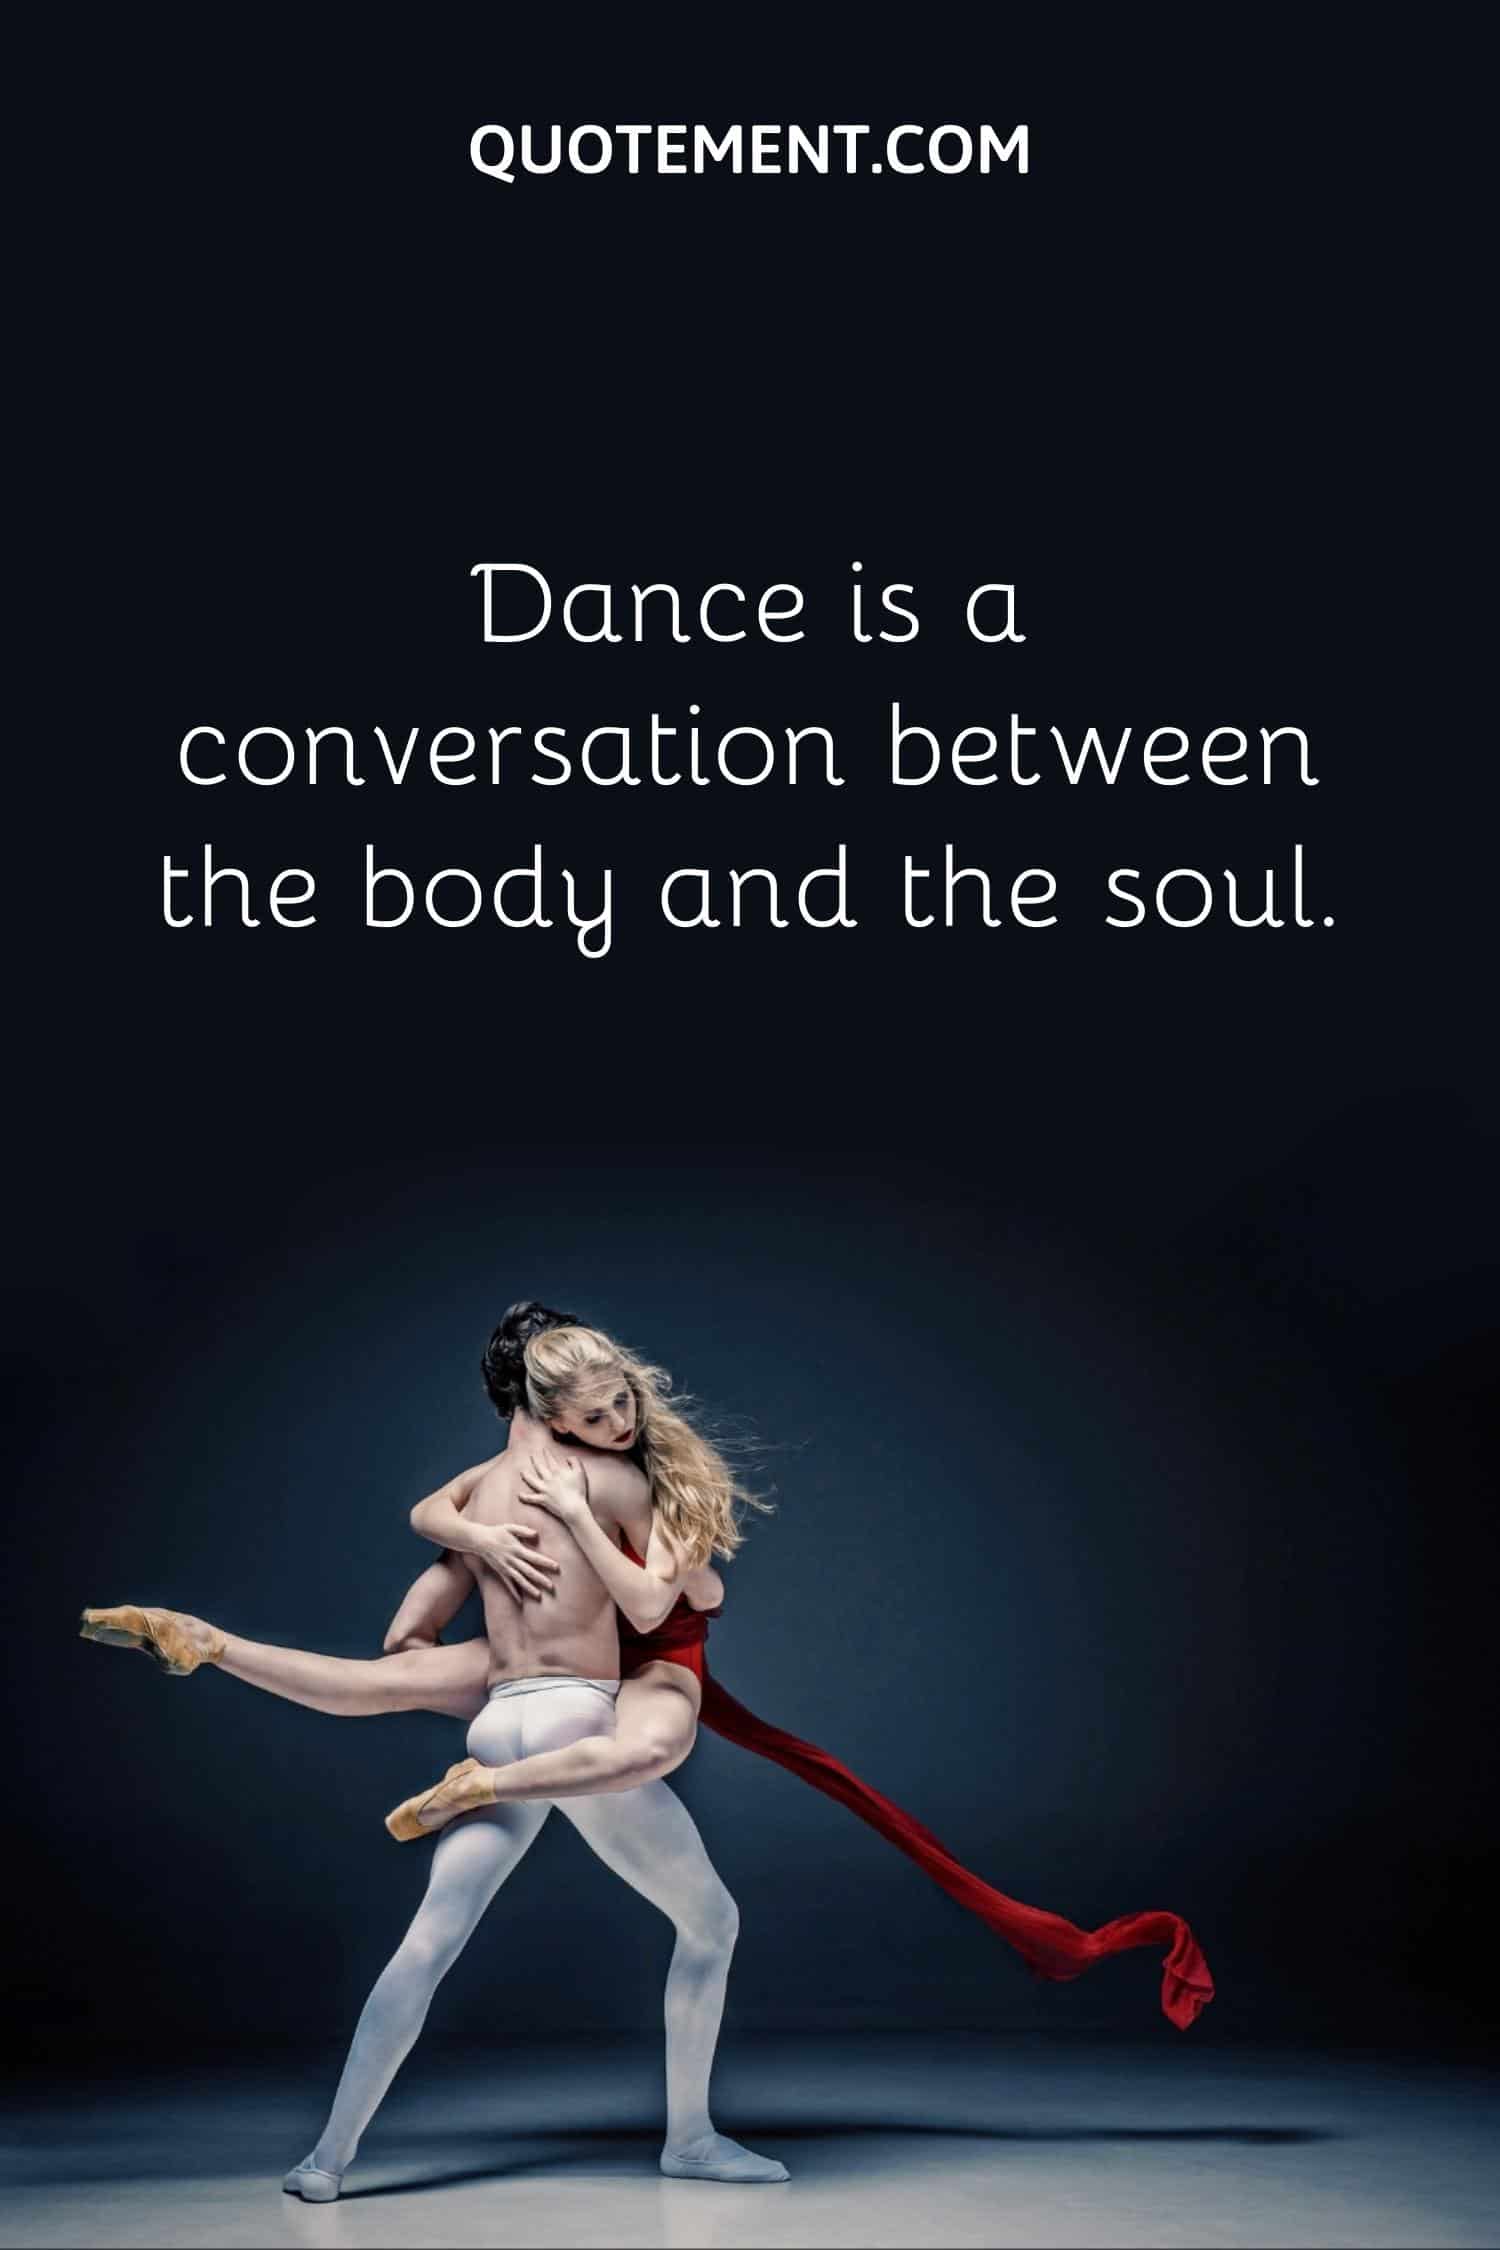 Dance is a conversation between the body and the soul